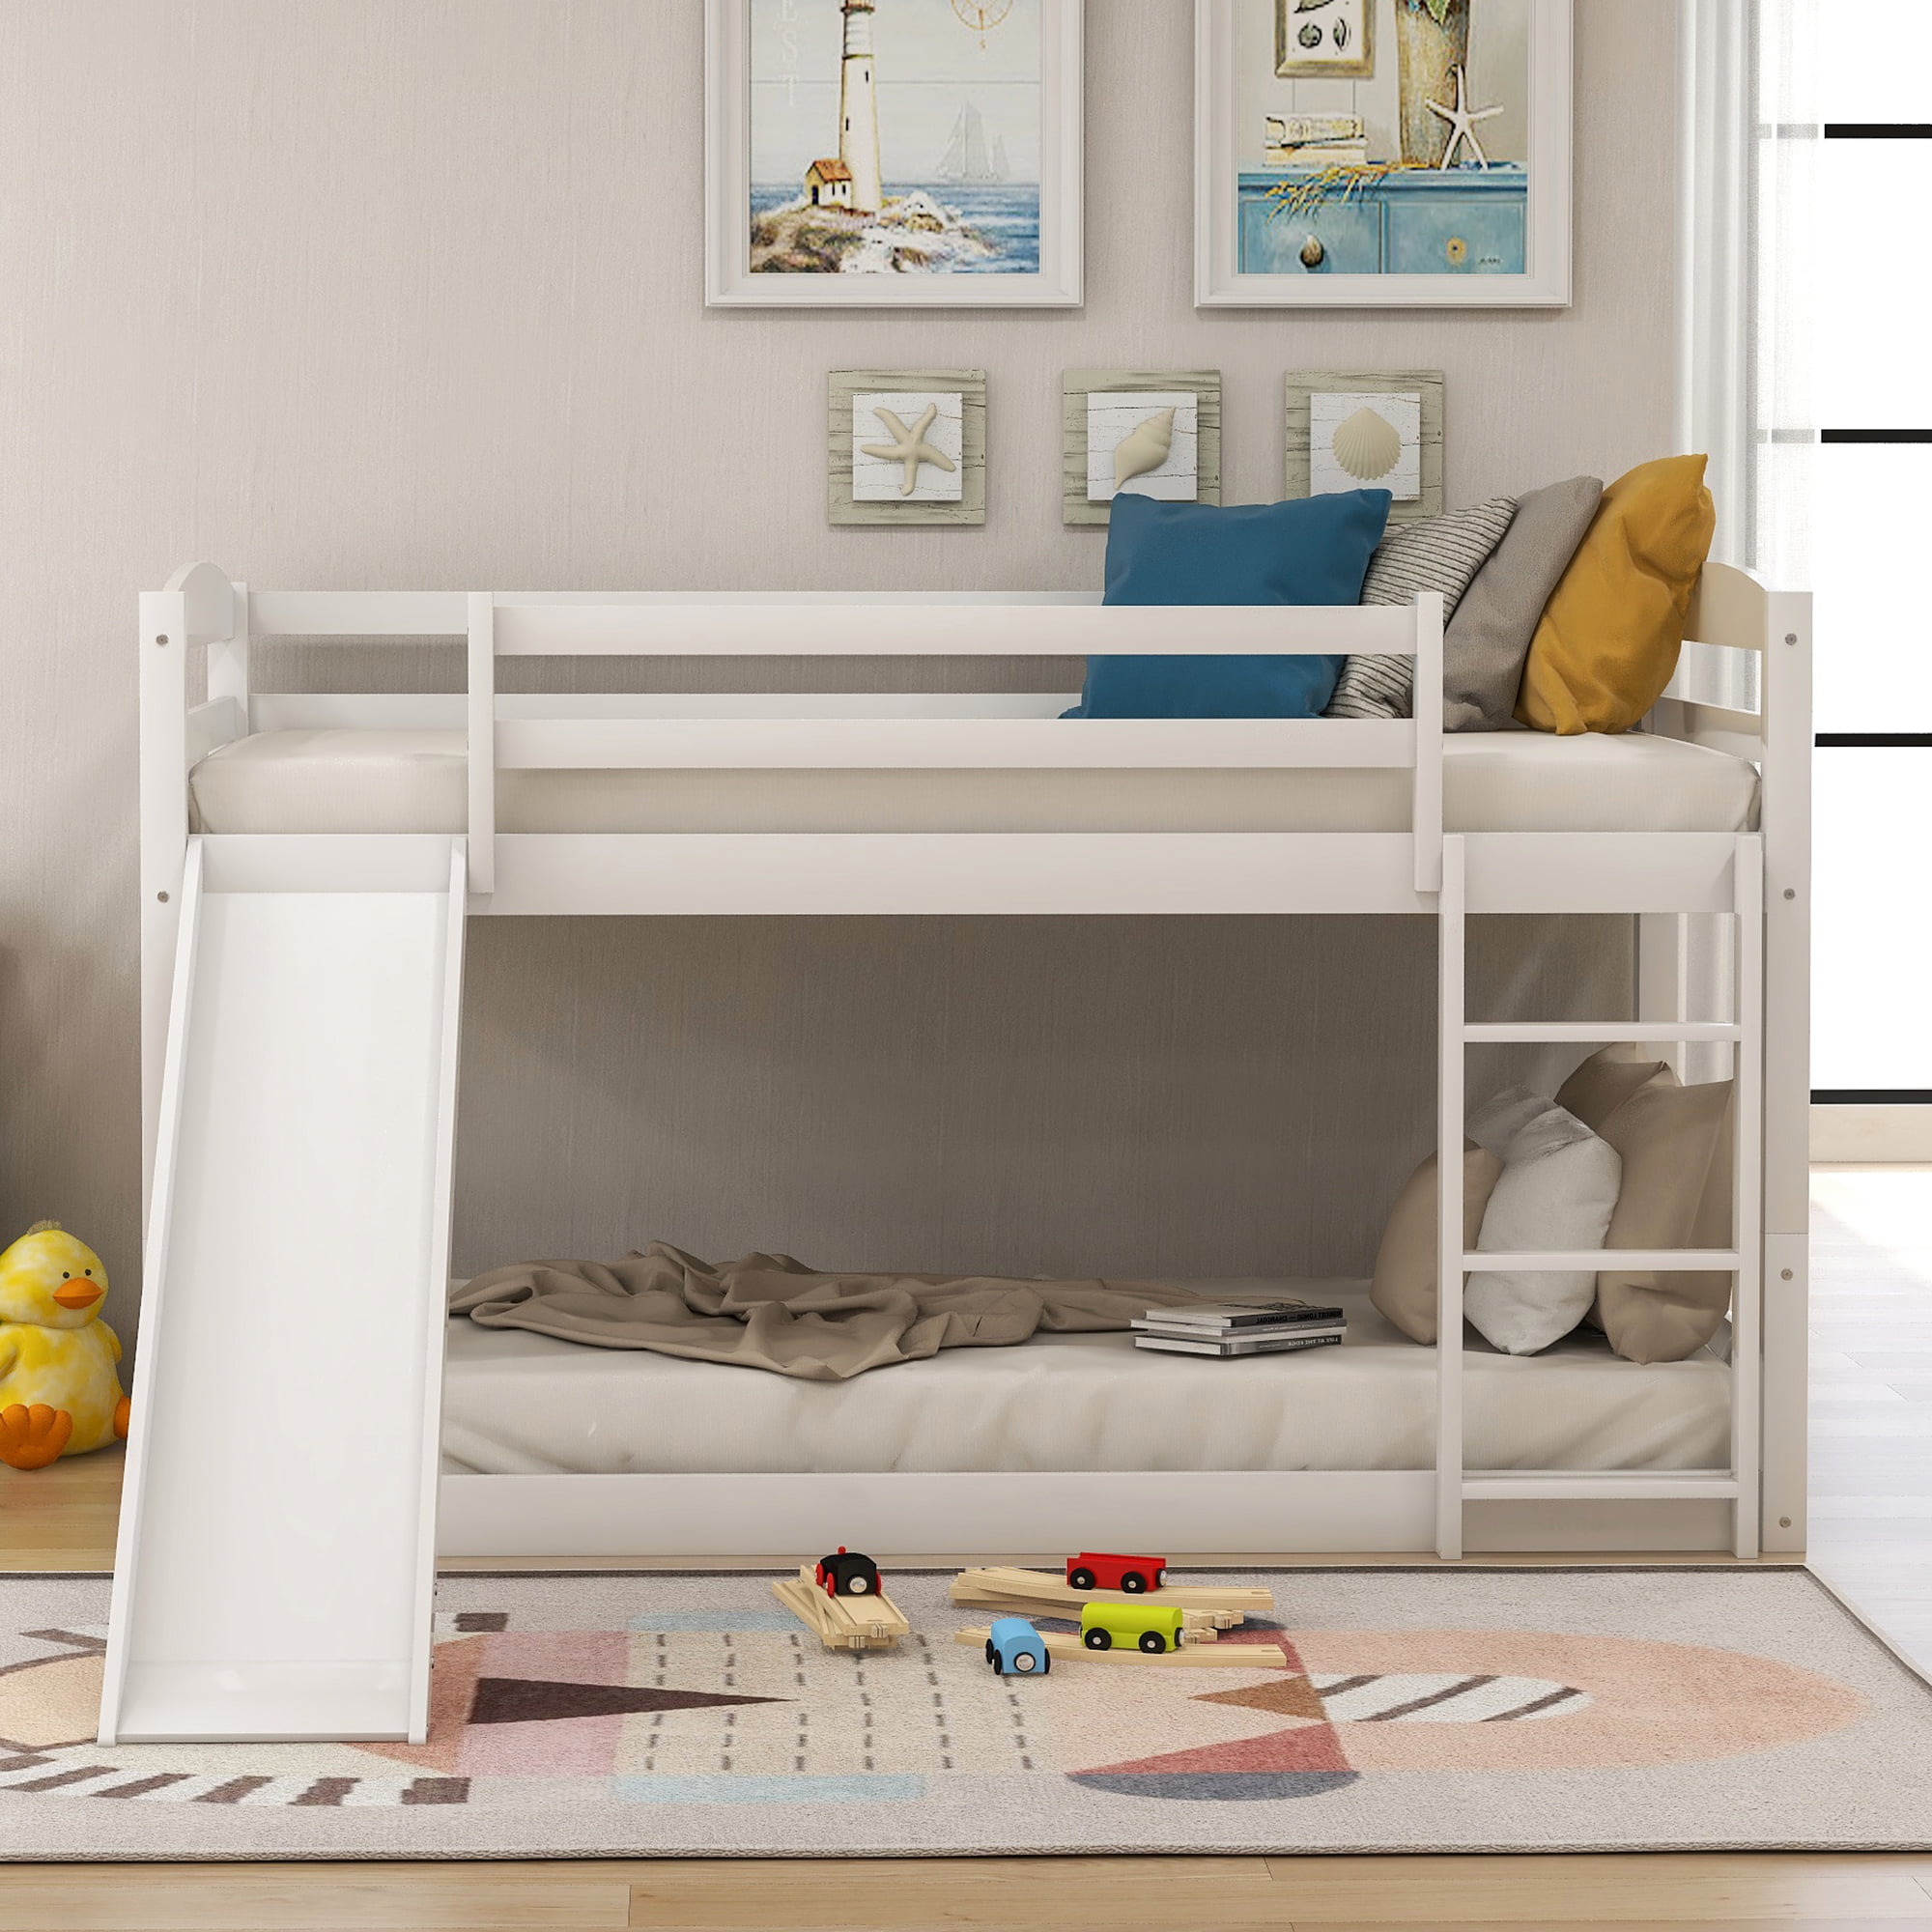 Solid Wood Low Bunk Beds For Kids, Cot Bunk Beds For Twins